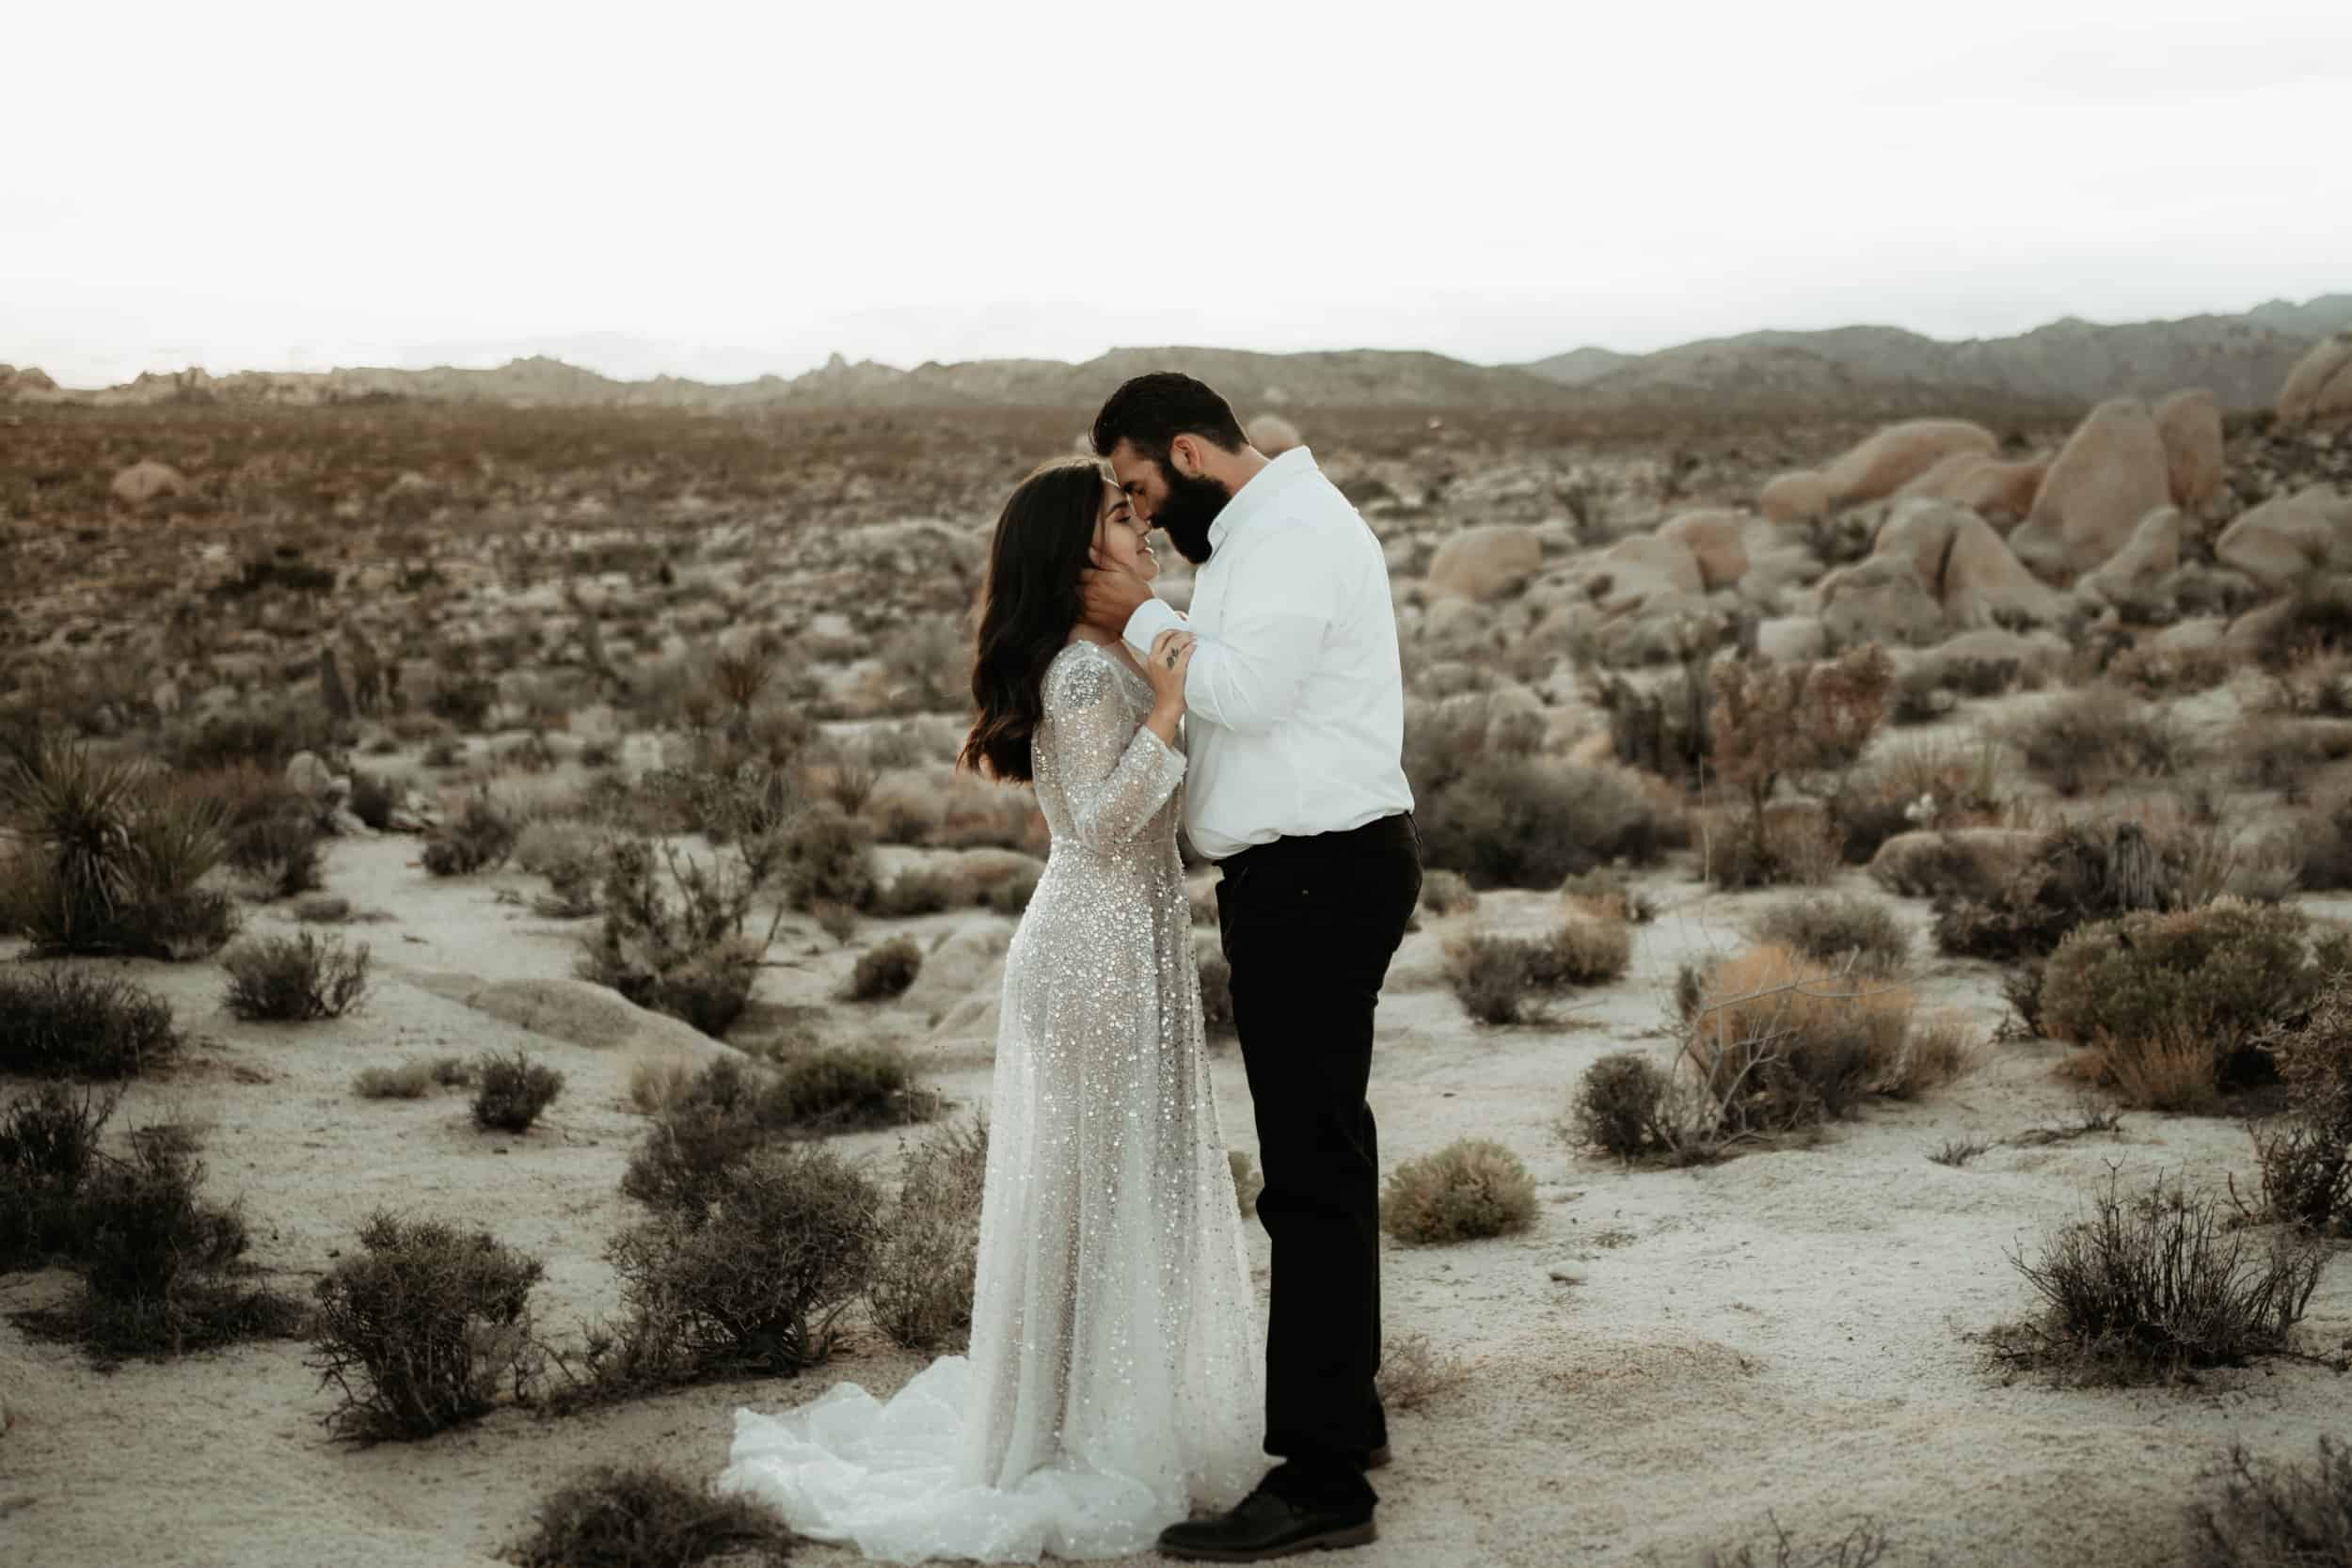 Where can you have your Elopement in Joshua Tree?